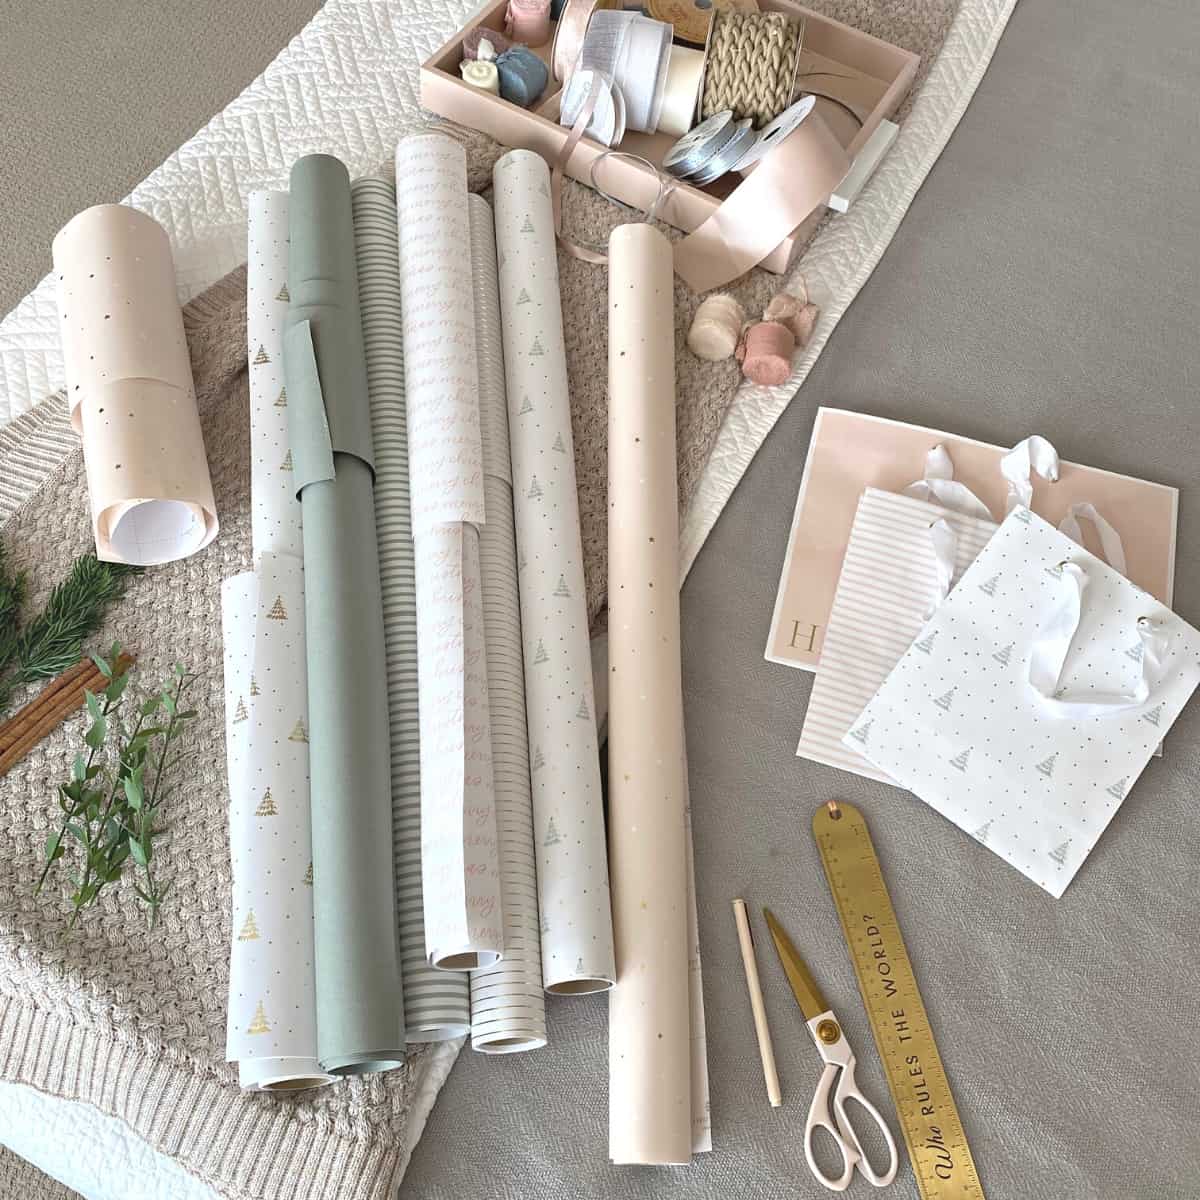 Gift wrapping supplies, including ribbon, wrapping paper and scissors